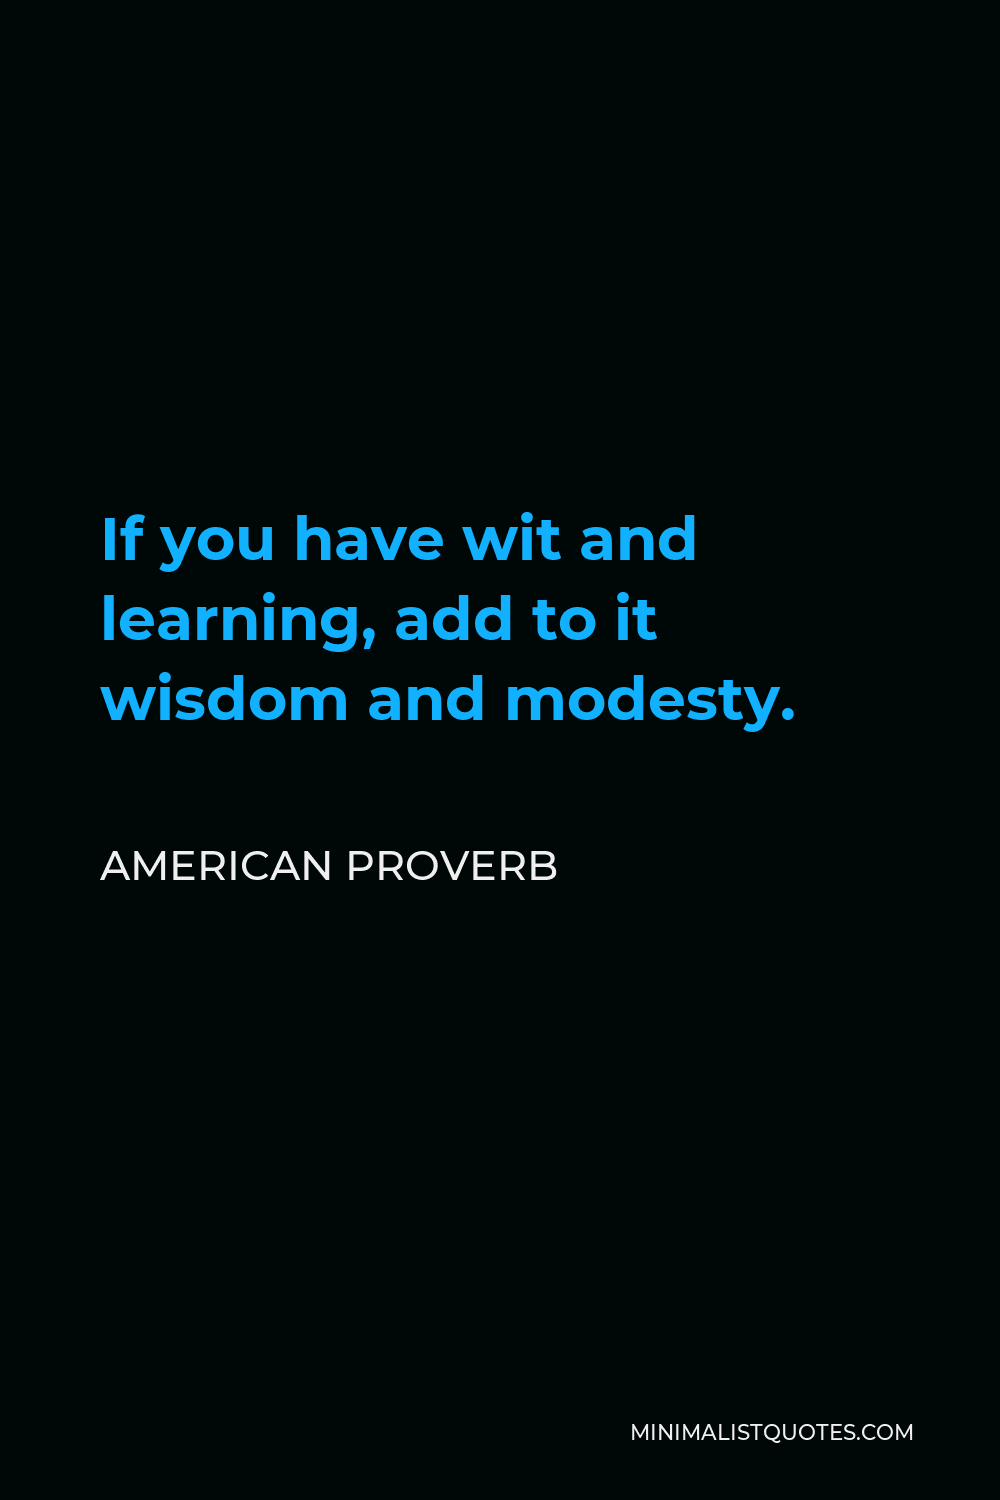 American Proverb Quote - If you have wit and learning, add to it wisdom and modesty.